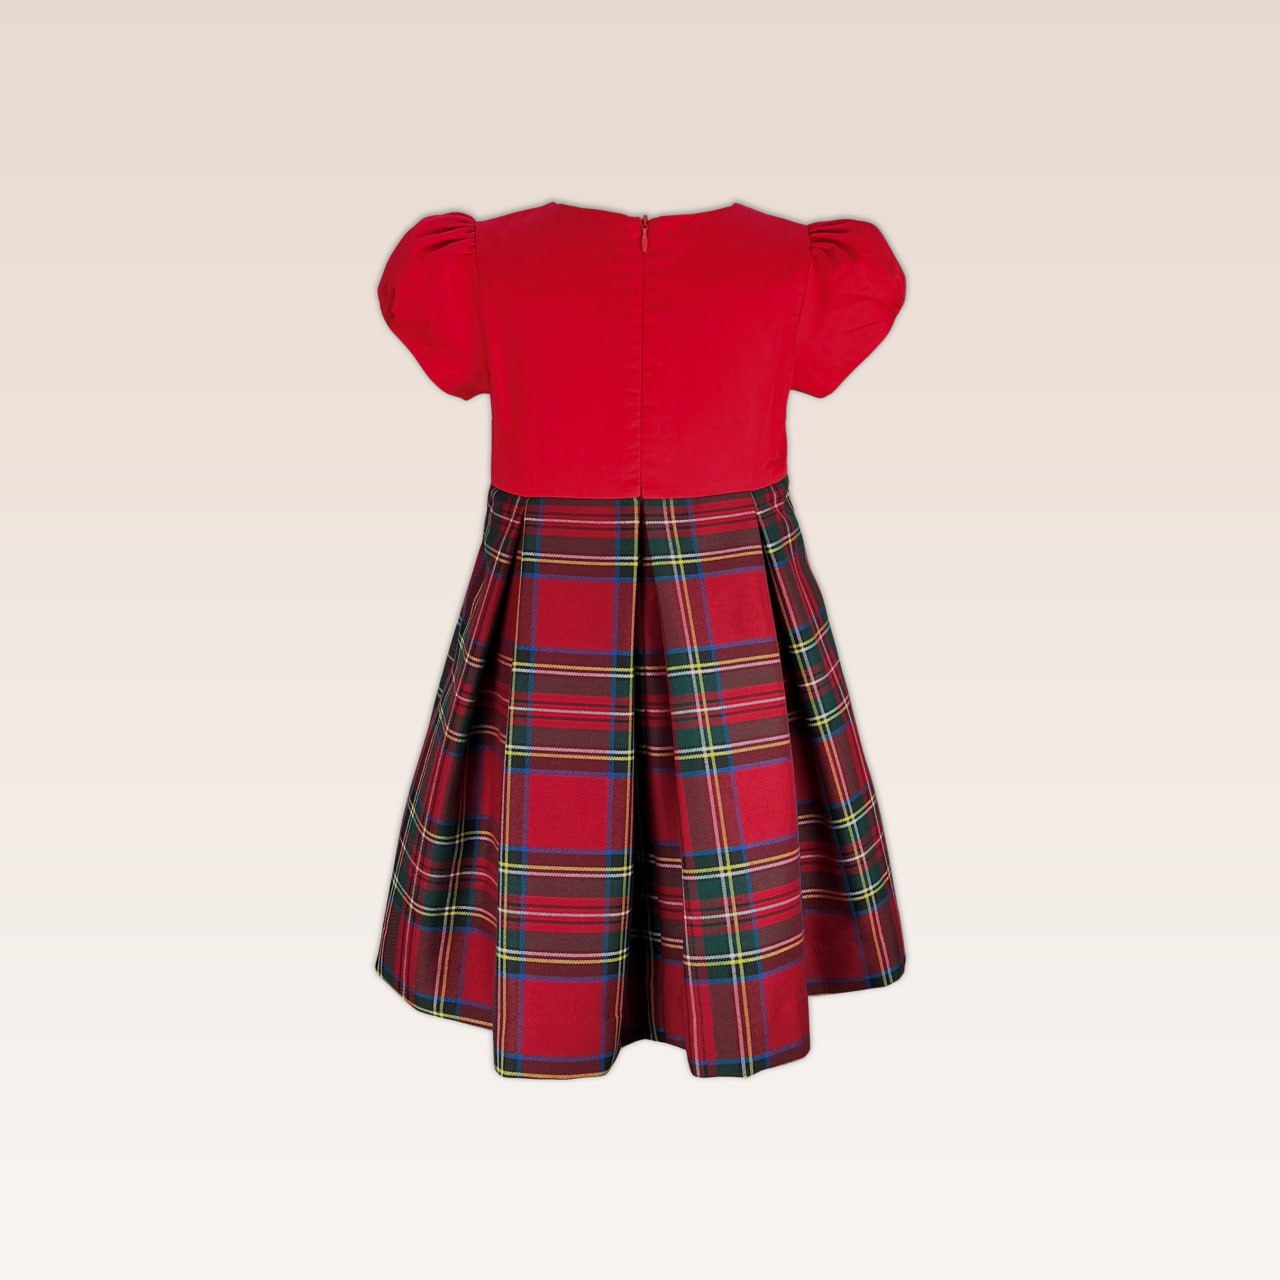 Danni Girls Red Pleated Front and Checkered Skirt Dress